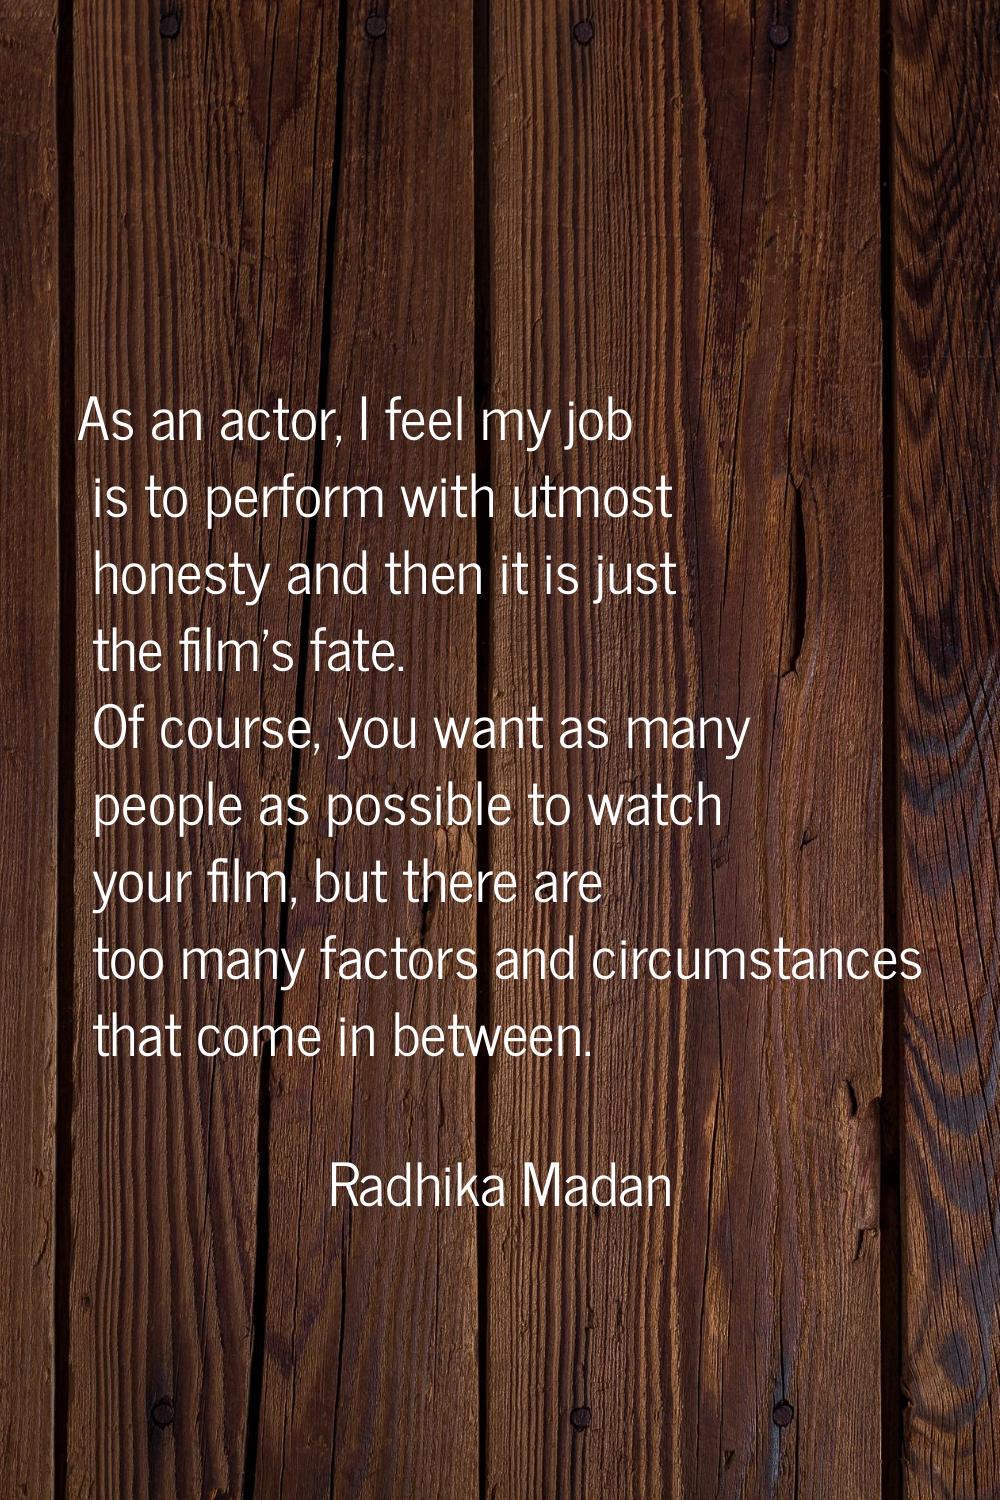 As an actor, I feel my job is to perform with utmost honesty and then it is just the film's fate. O